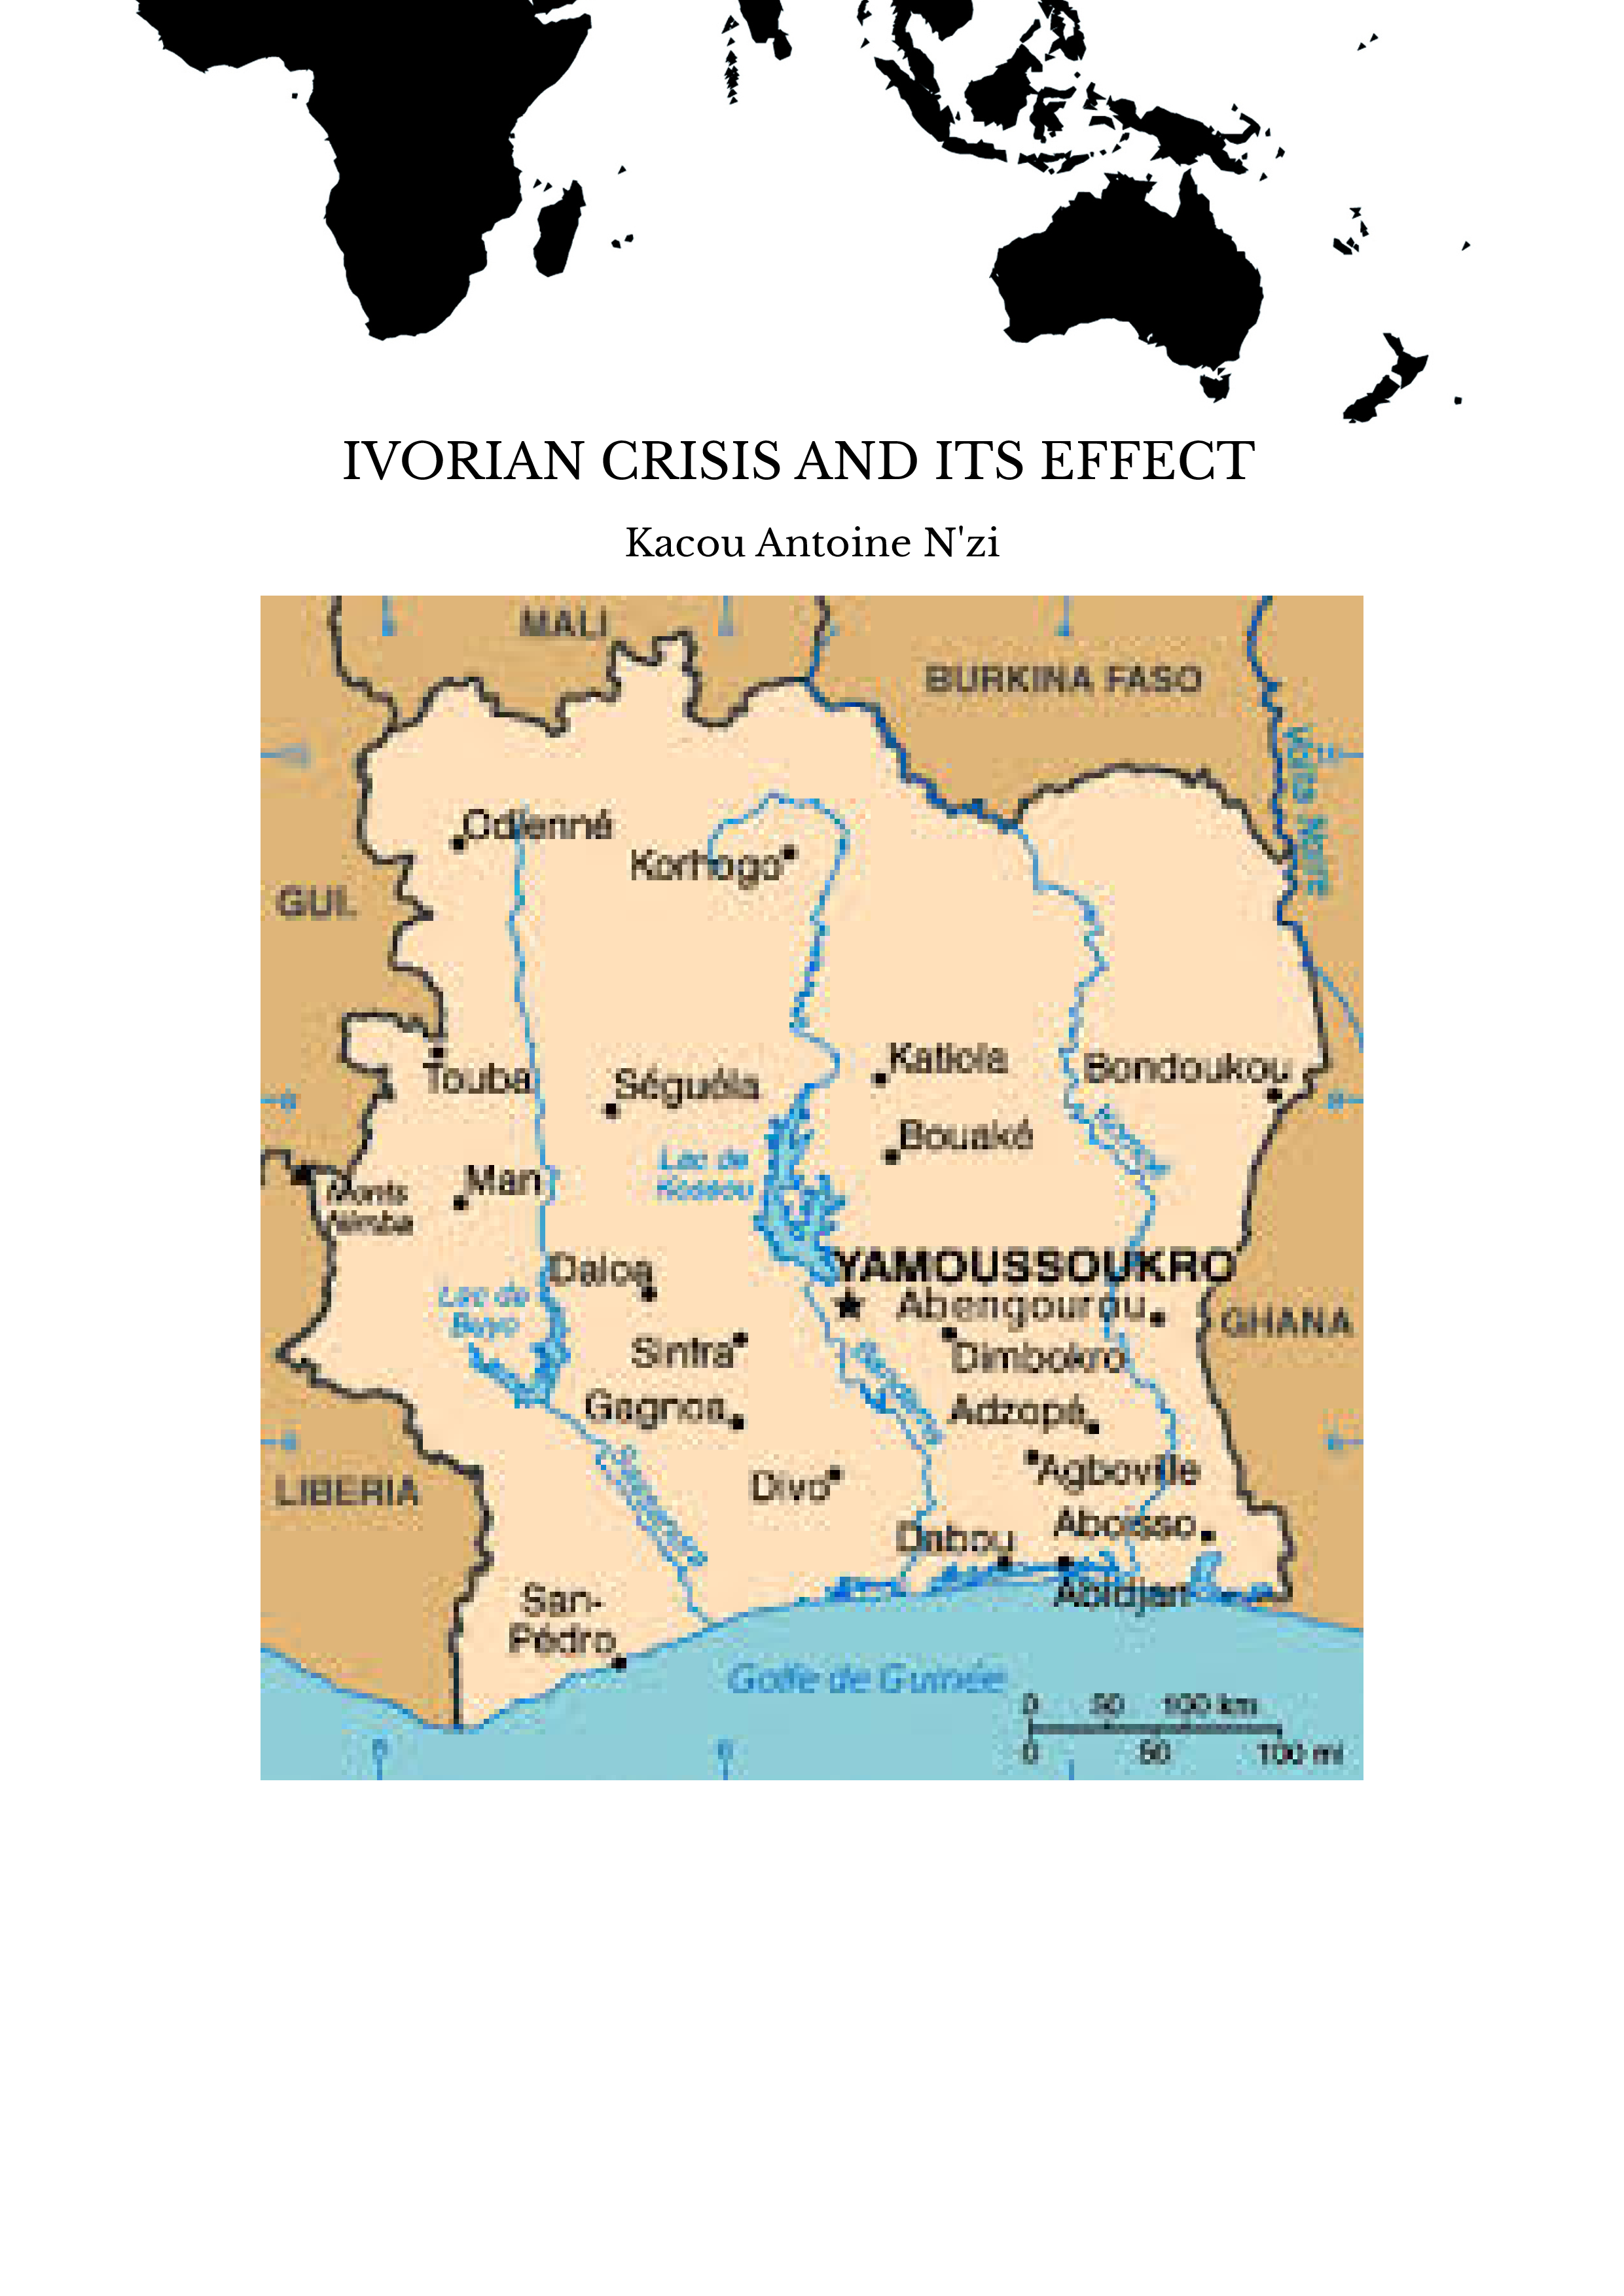 IVORIAN CRISIS AND ITS EFFECT 